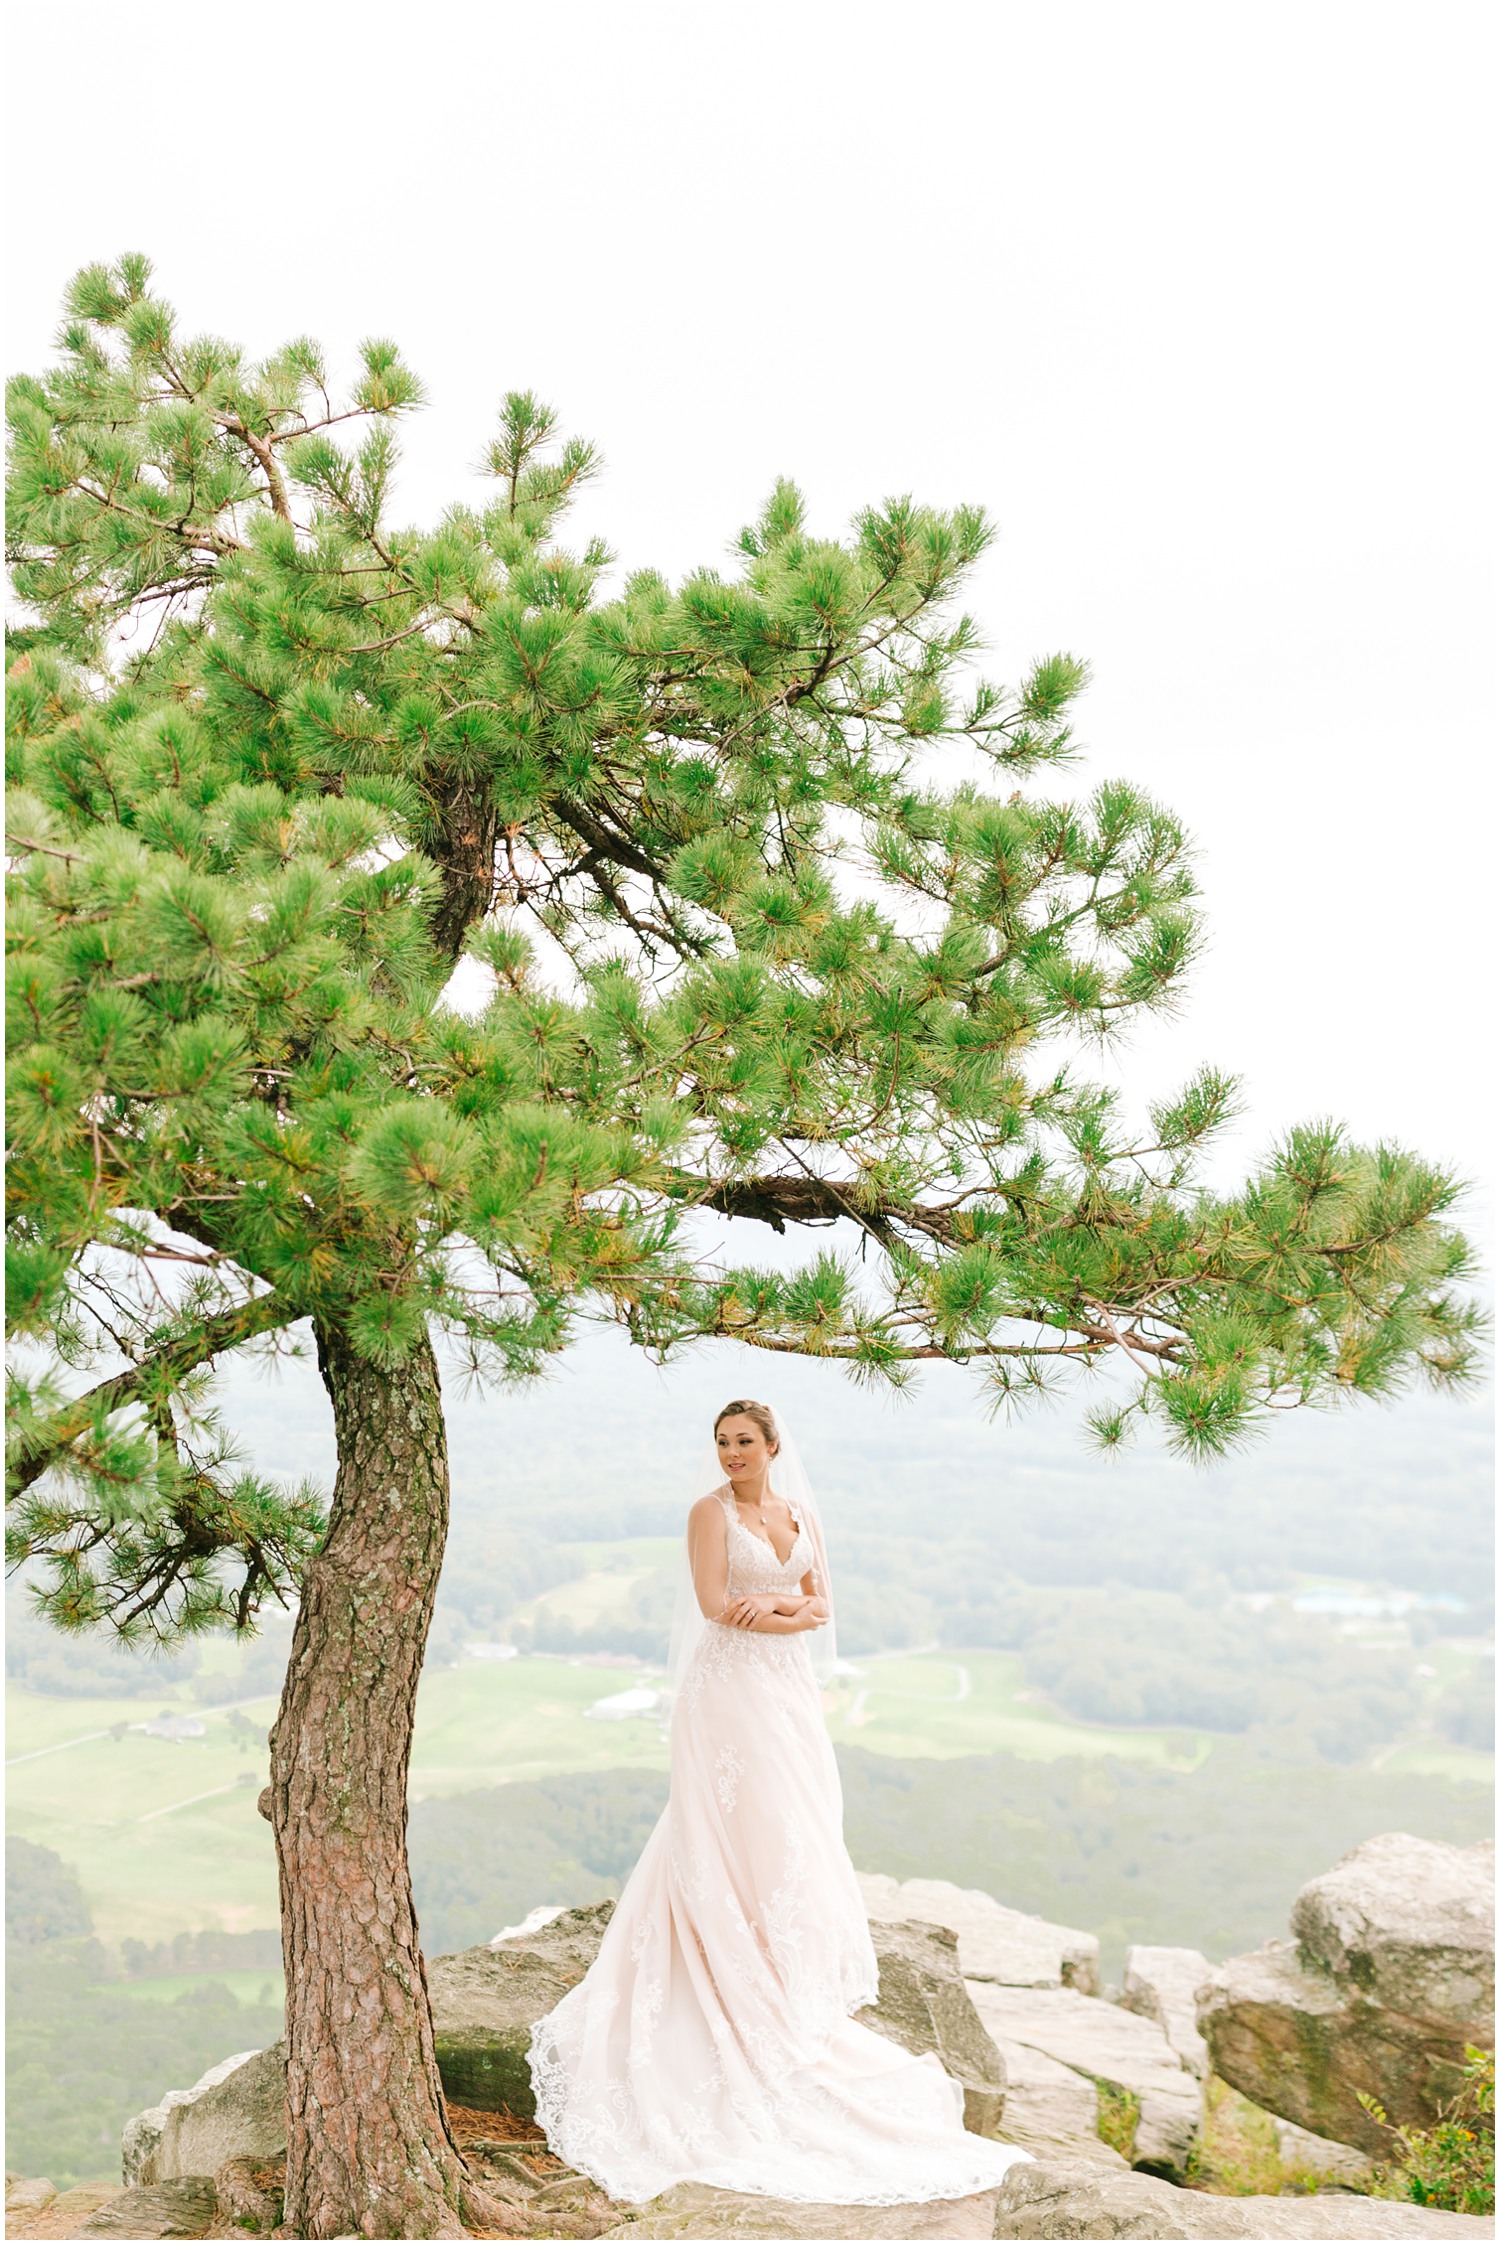 Pilot Mountain bridal session with bride posing under tree